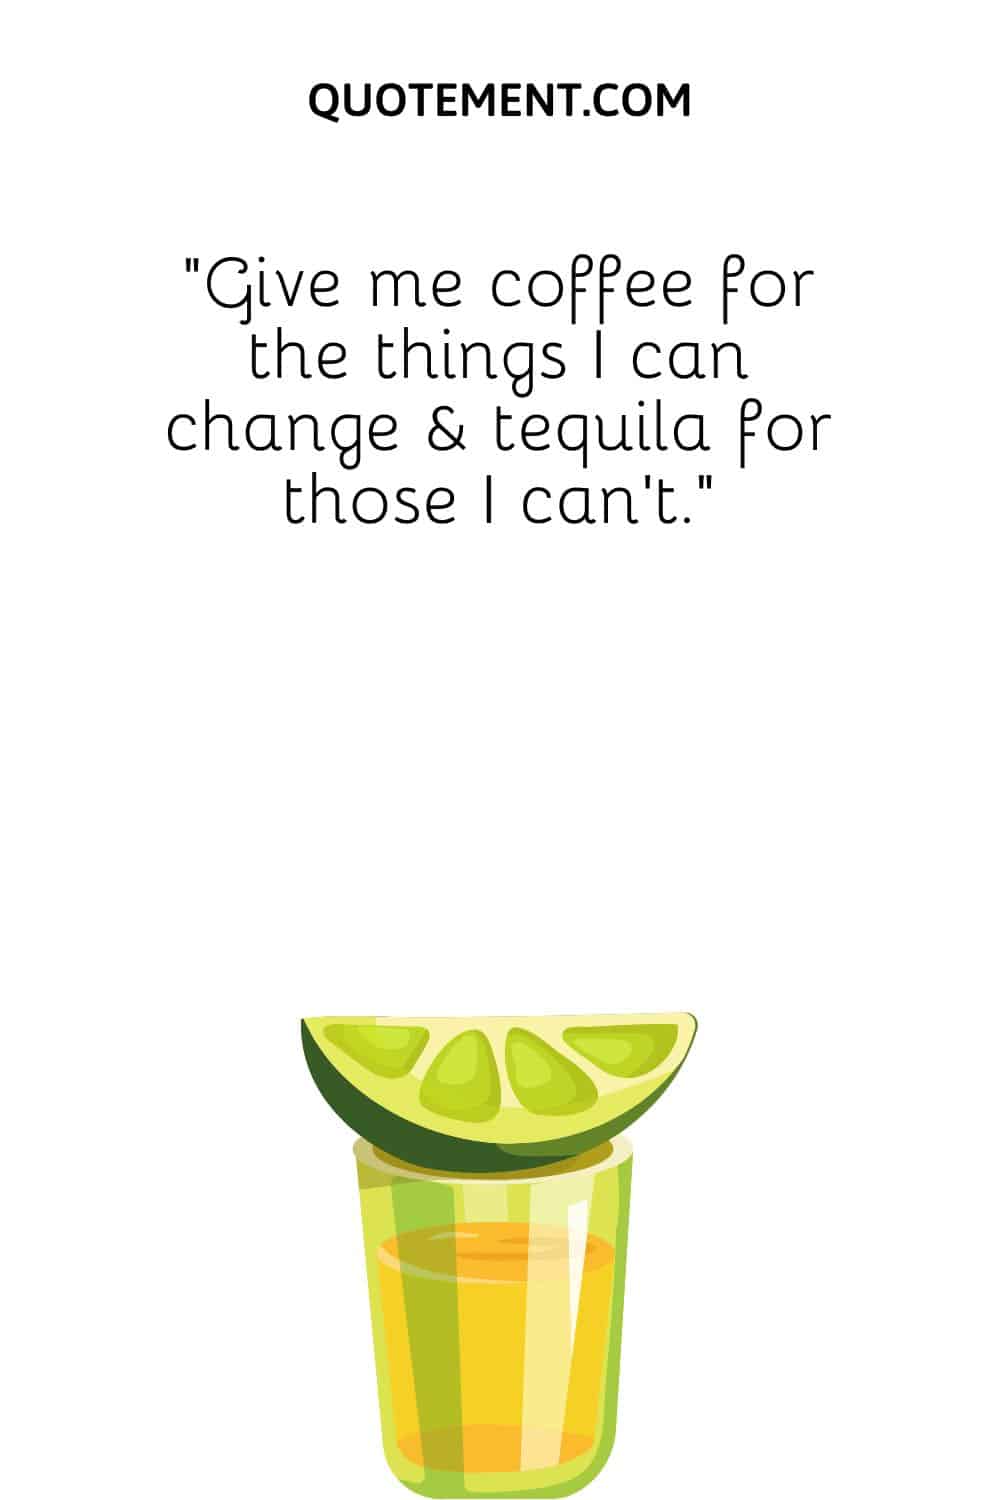 Give me coffee for the things I can change & tequila for those I can’t.